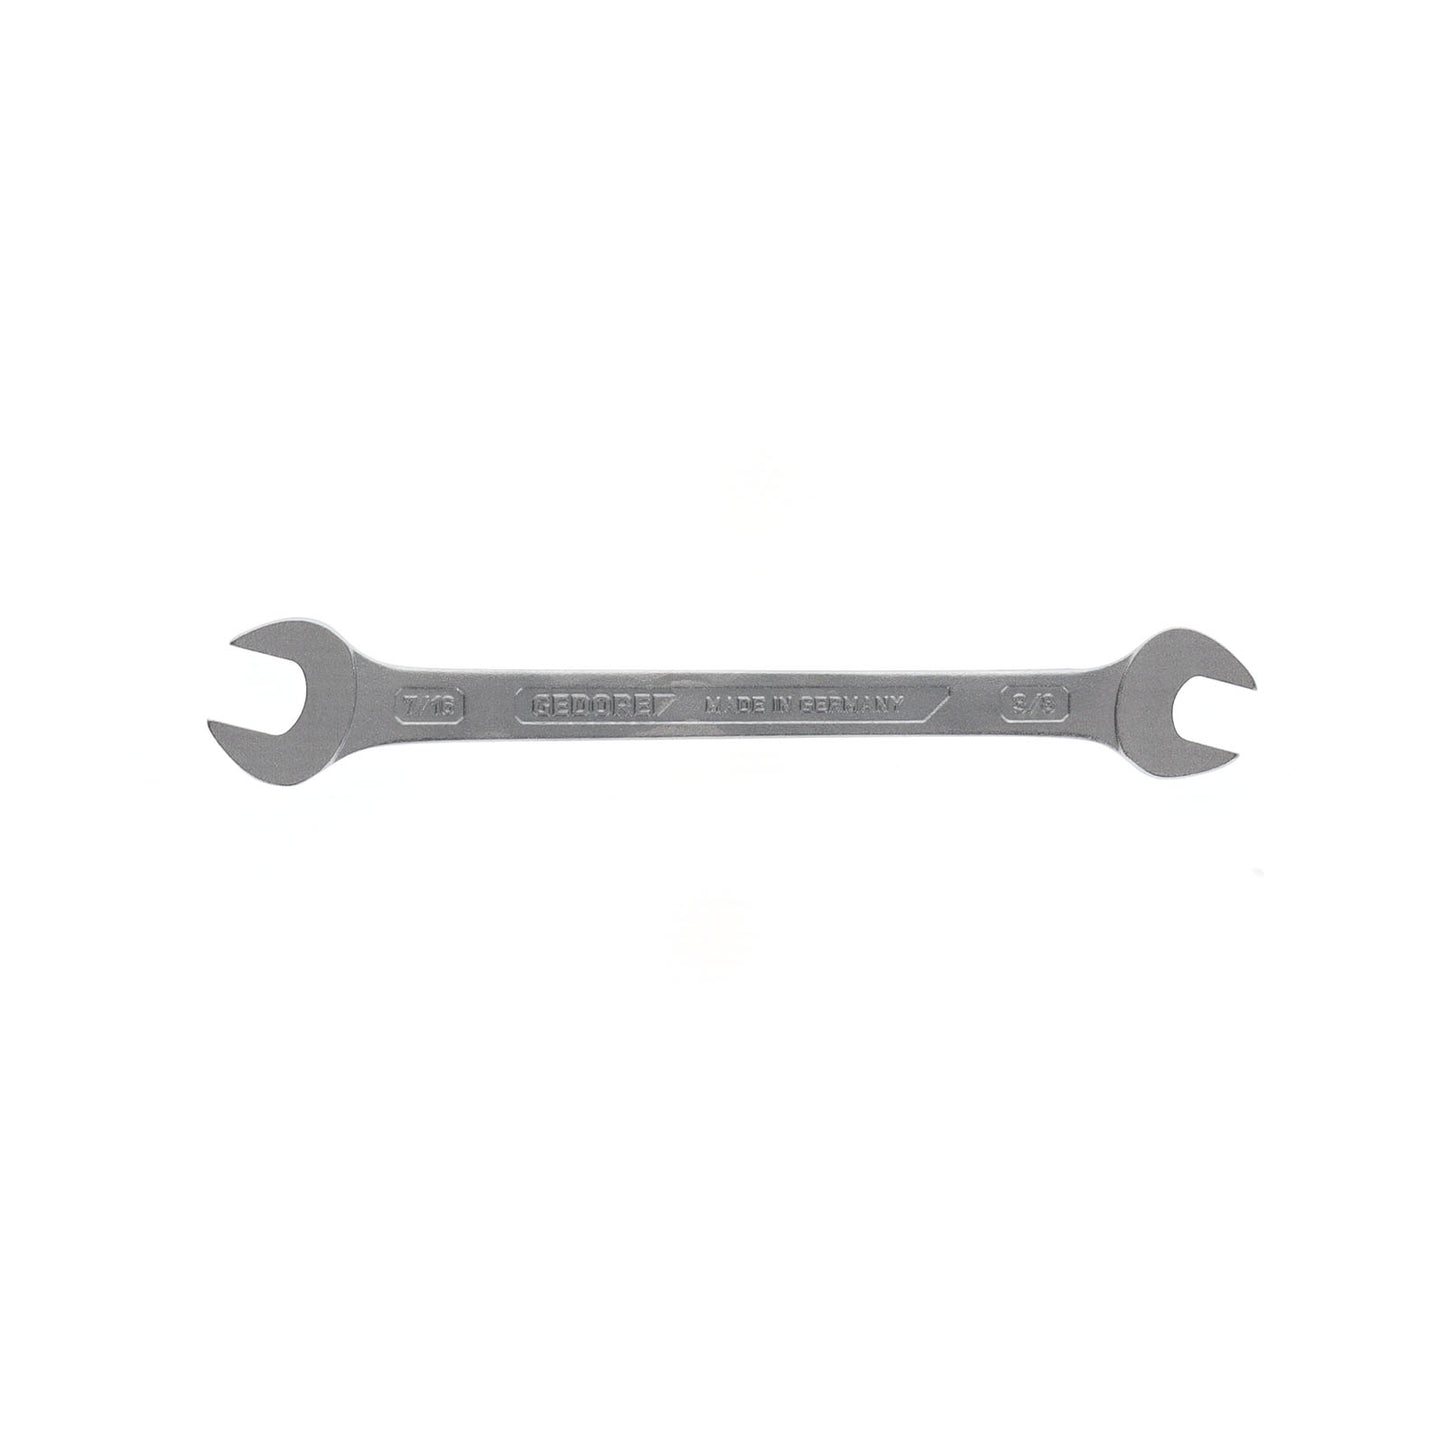 GEDORE 6 3/8X7/16AF - 2-Mount Fixed Wrench, 3/8x7/16AF (6070290)